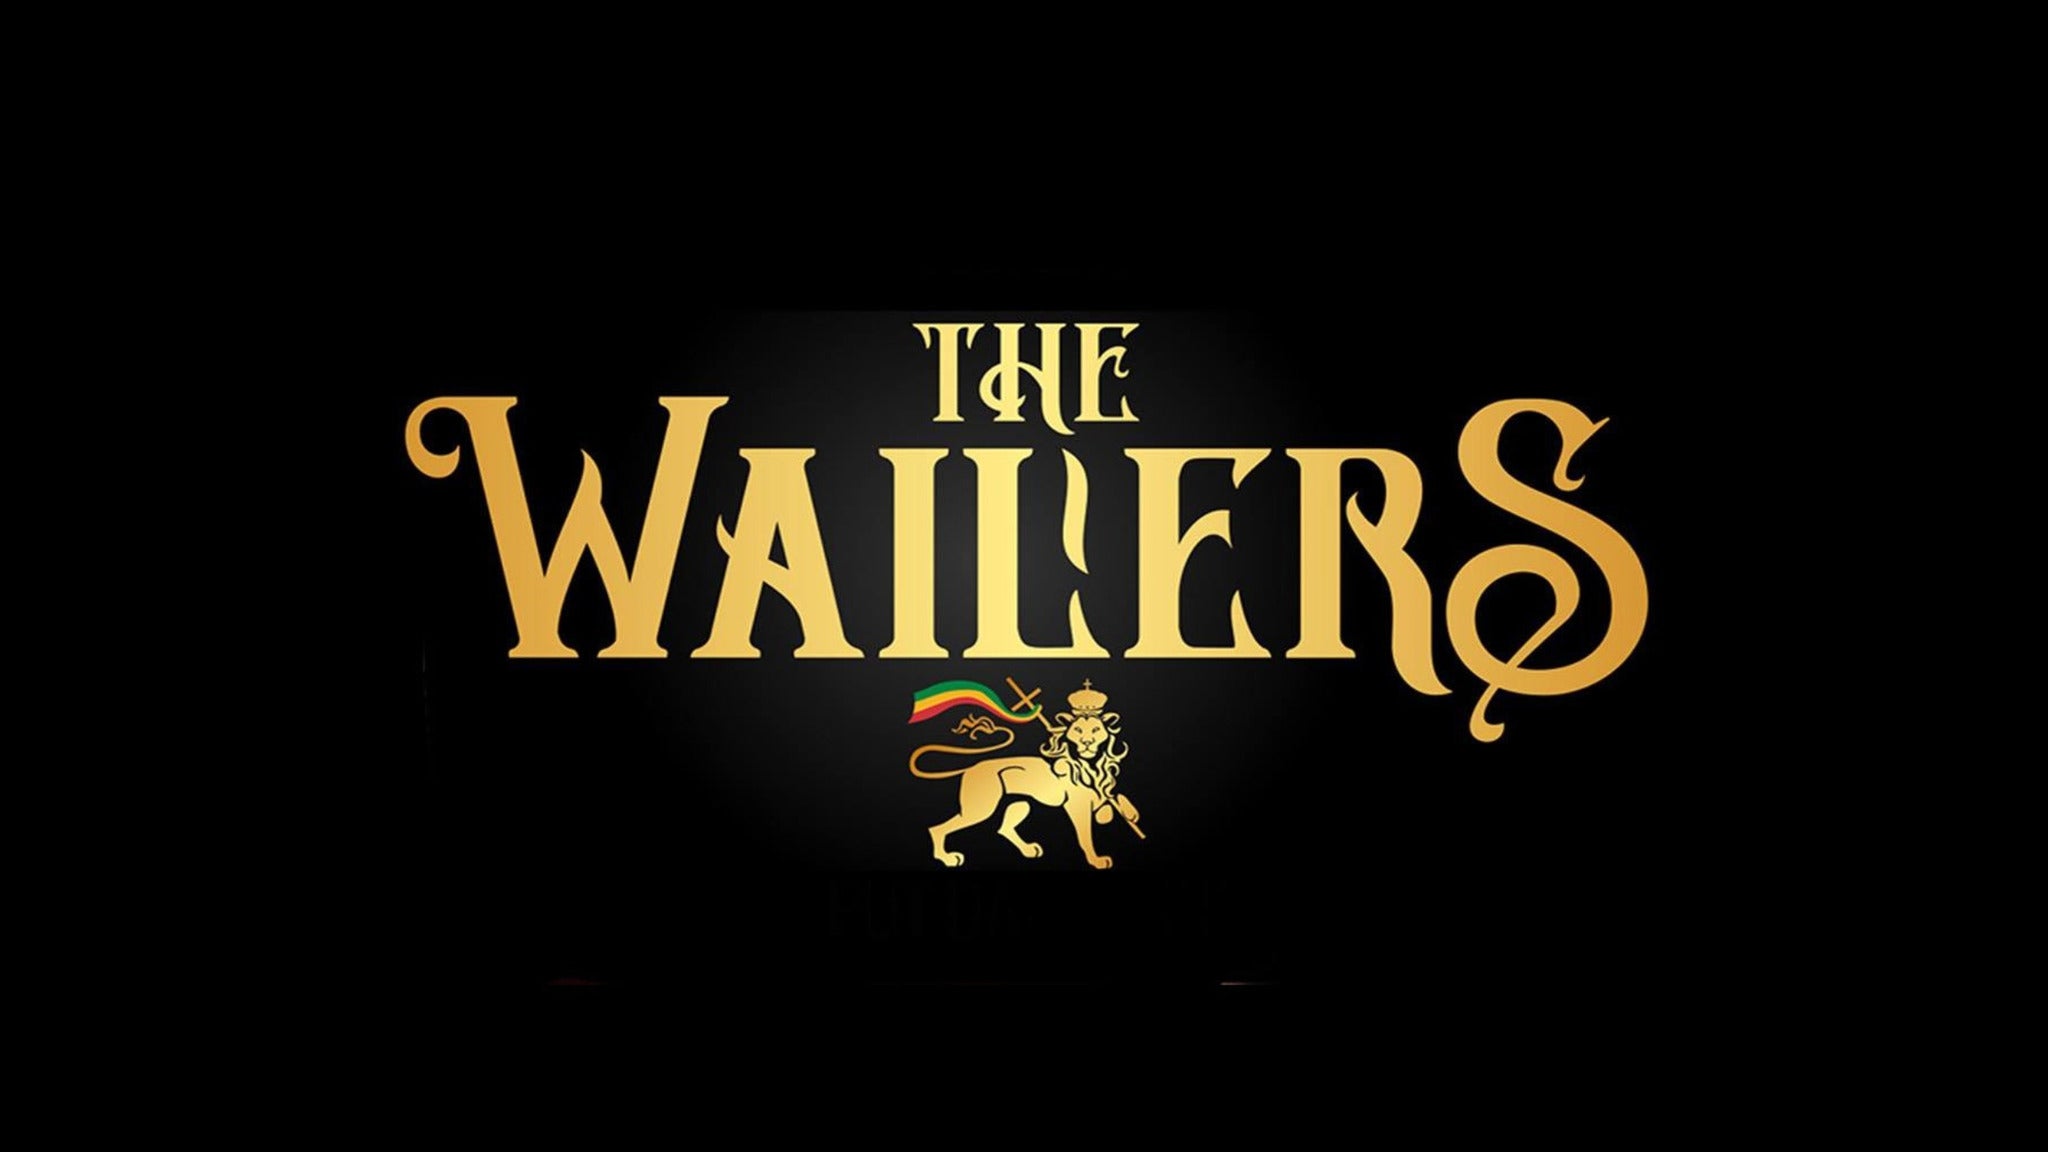 The Wailers - One World 2022 Tour